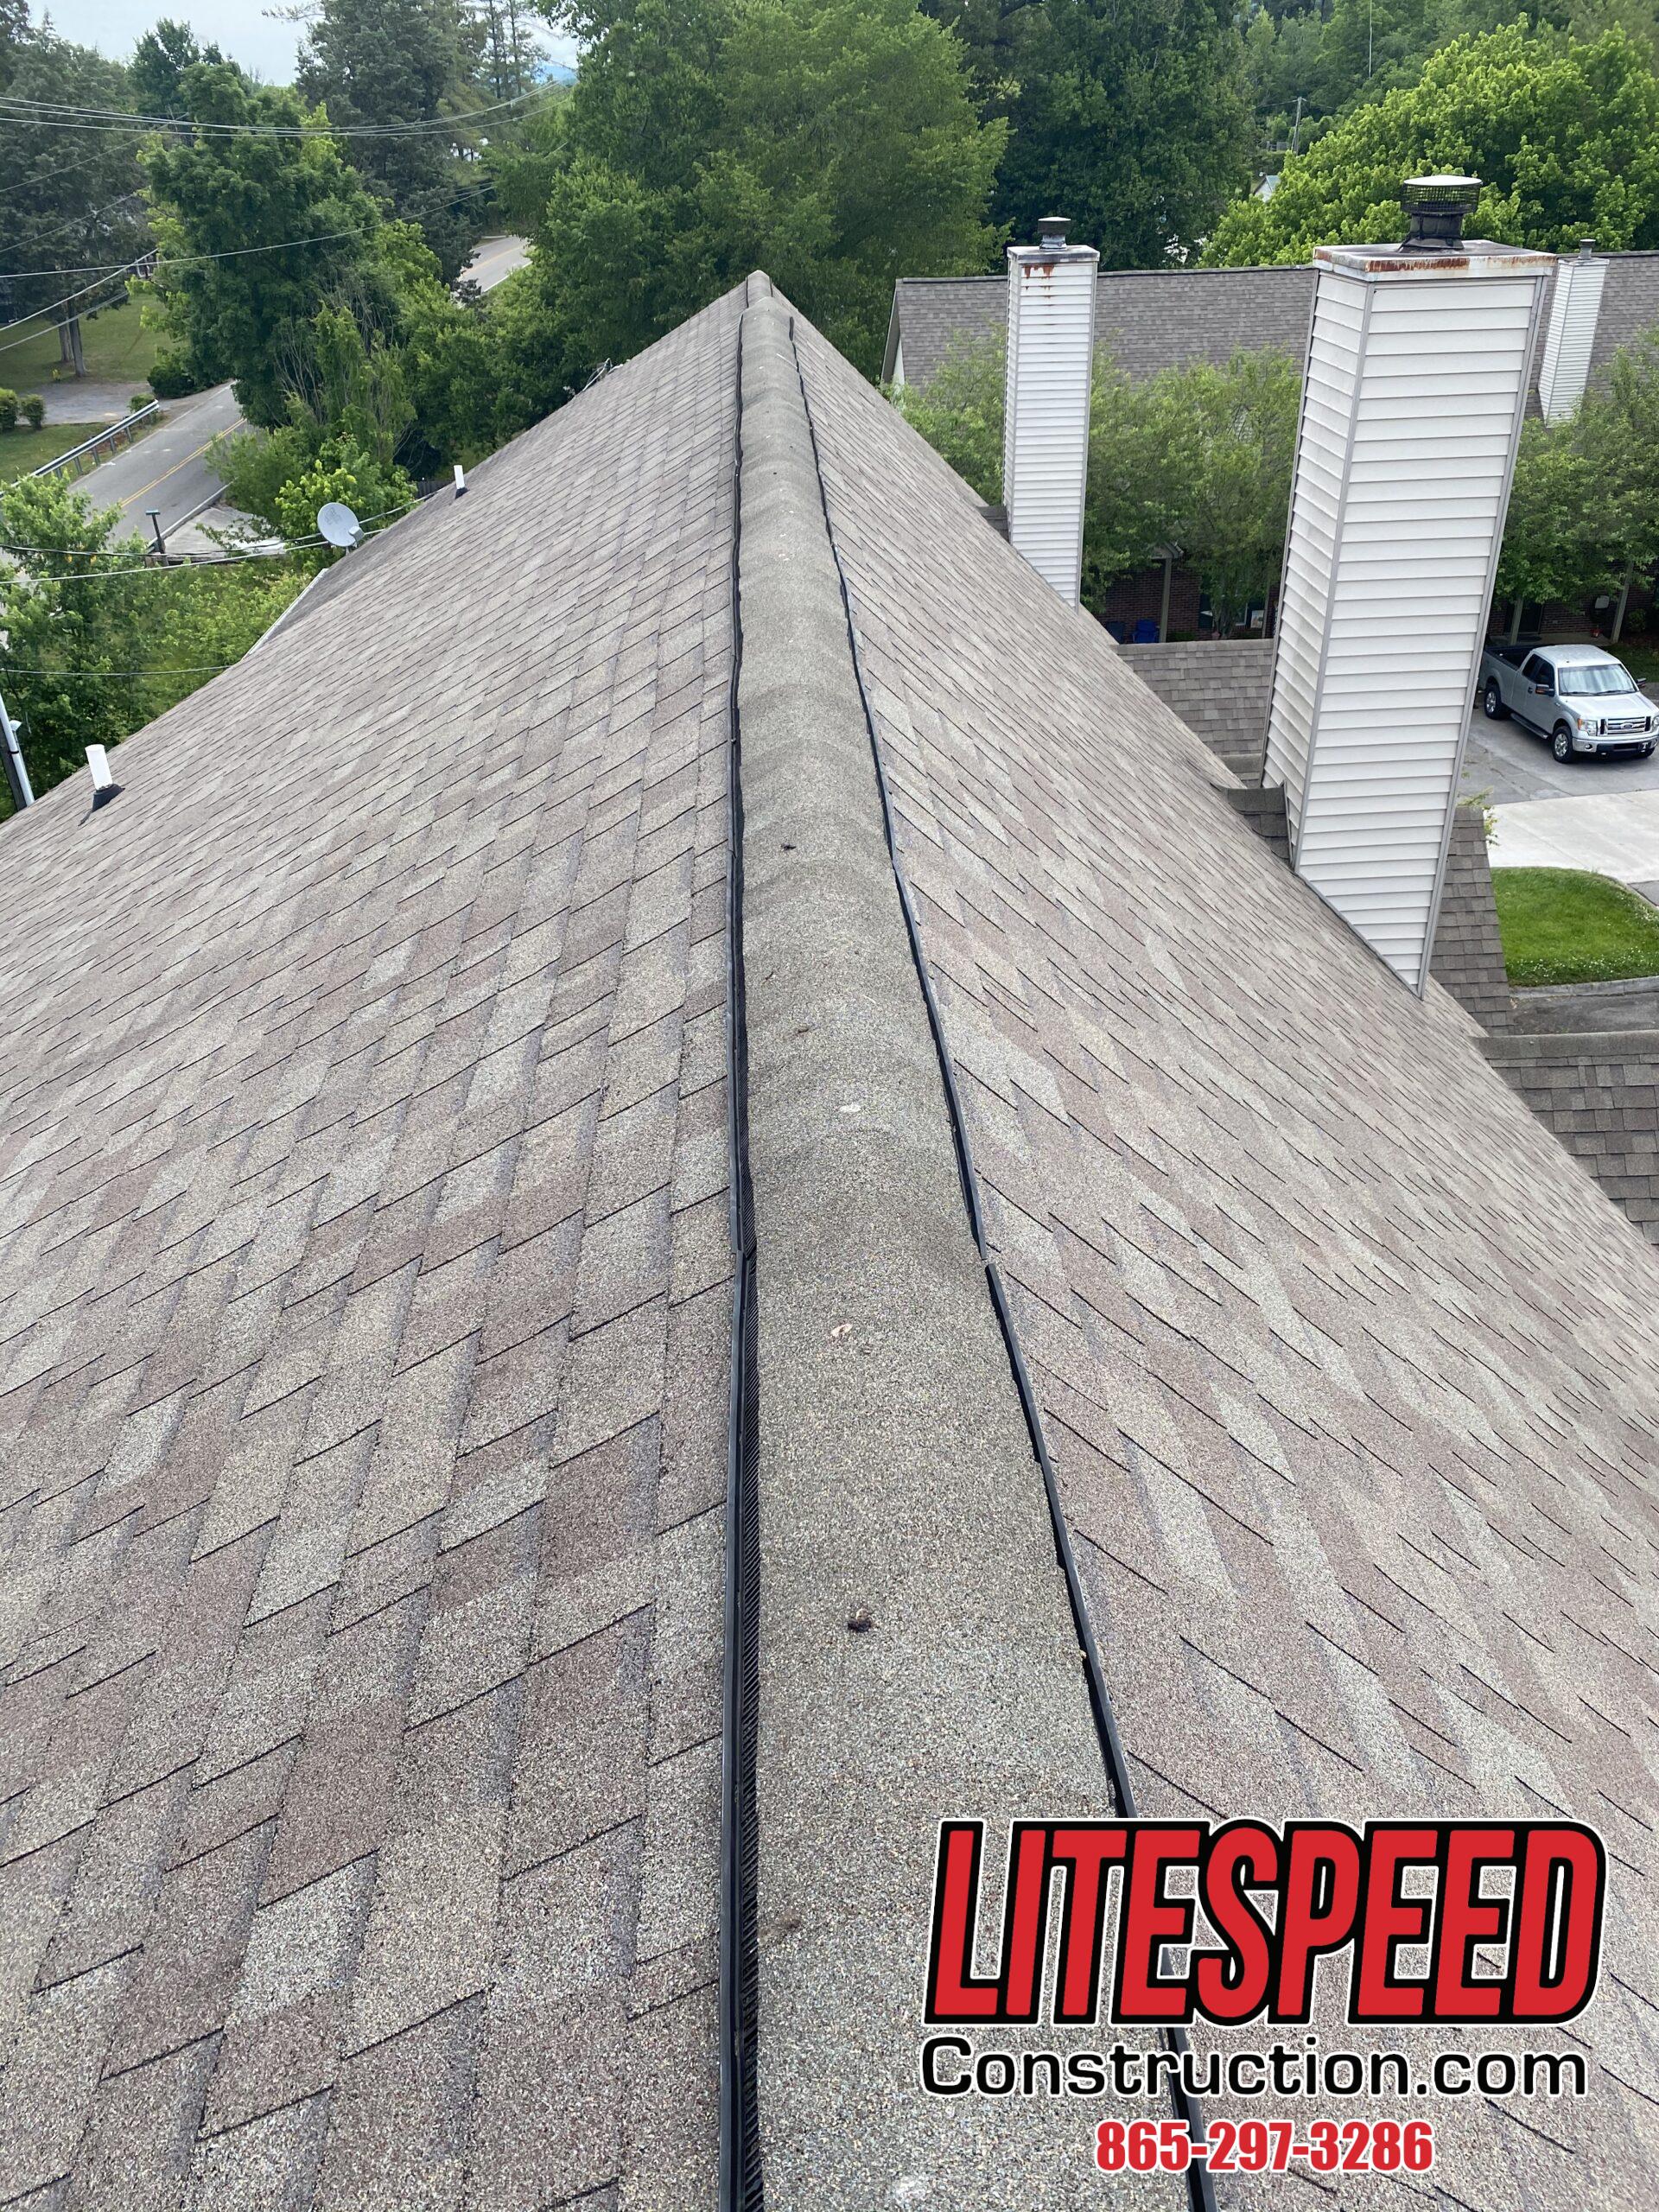 This is a picture of a ridge vent with ridge cap shingles